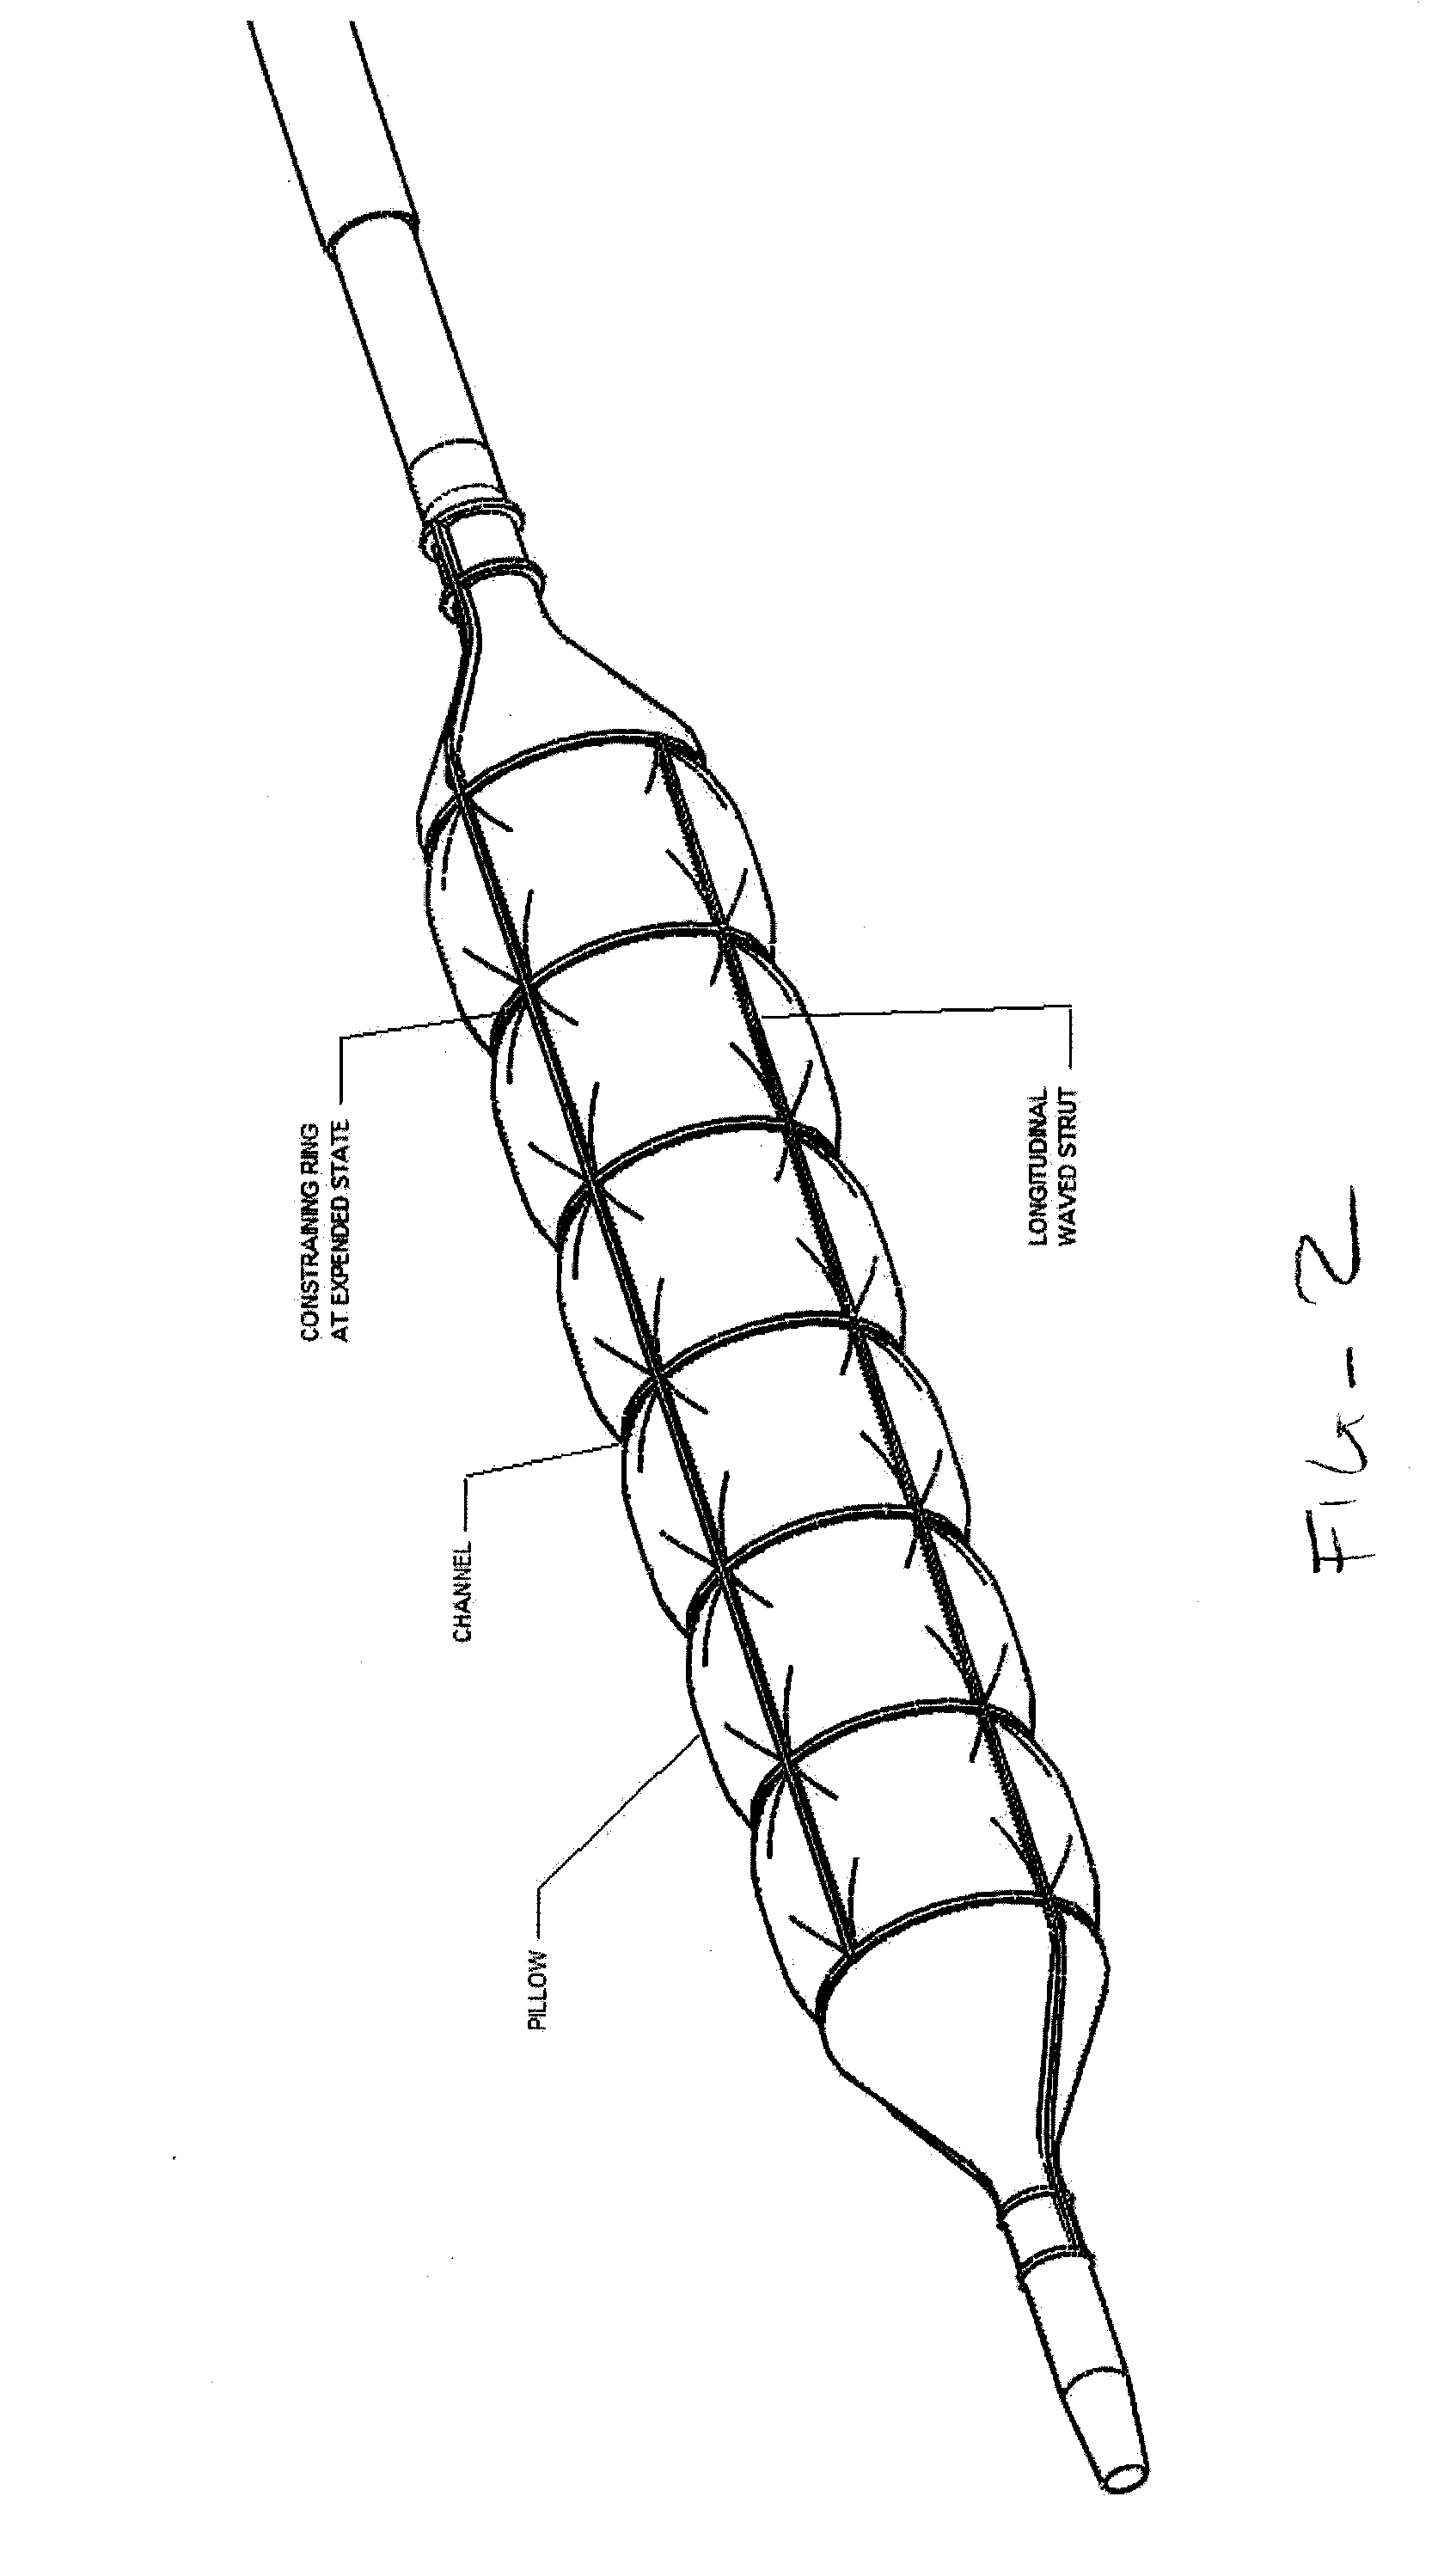 Constraining structure with non-linear axial struts